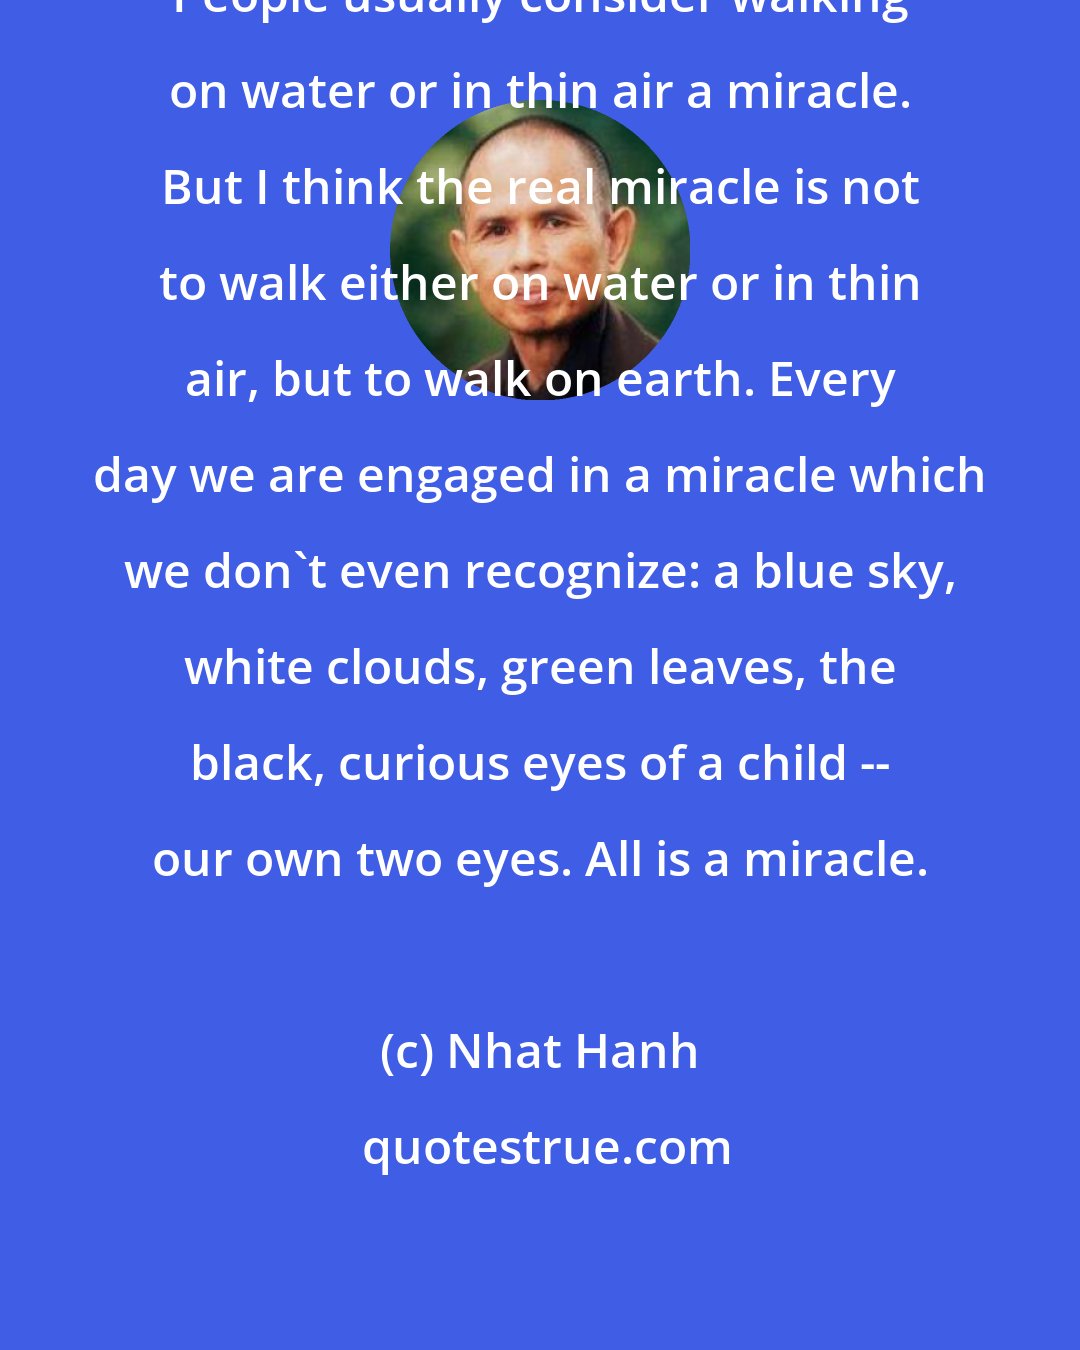 Nhat Hanh: People usually consider walking on water or in thin air a miracle. But I think the real miracle is not to walk either on water or in thin air, but to walk on earth. Every day we are engaged in a miracle which we don't even recognize: a blue sky, white clouds, green leaves, the black, curious eyes of a child -- our own two eyes. All is a miracle.